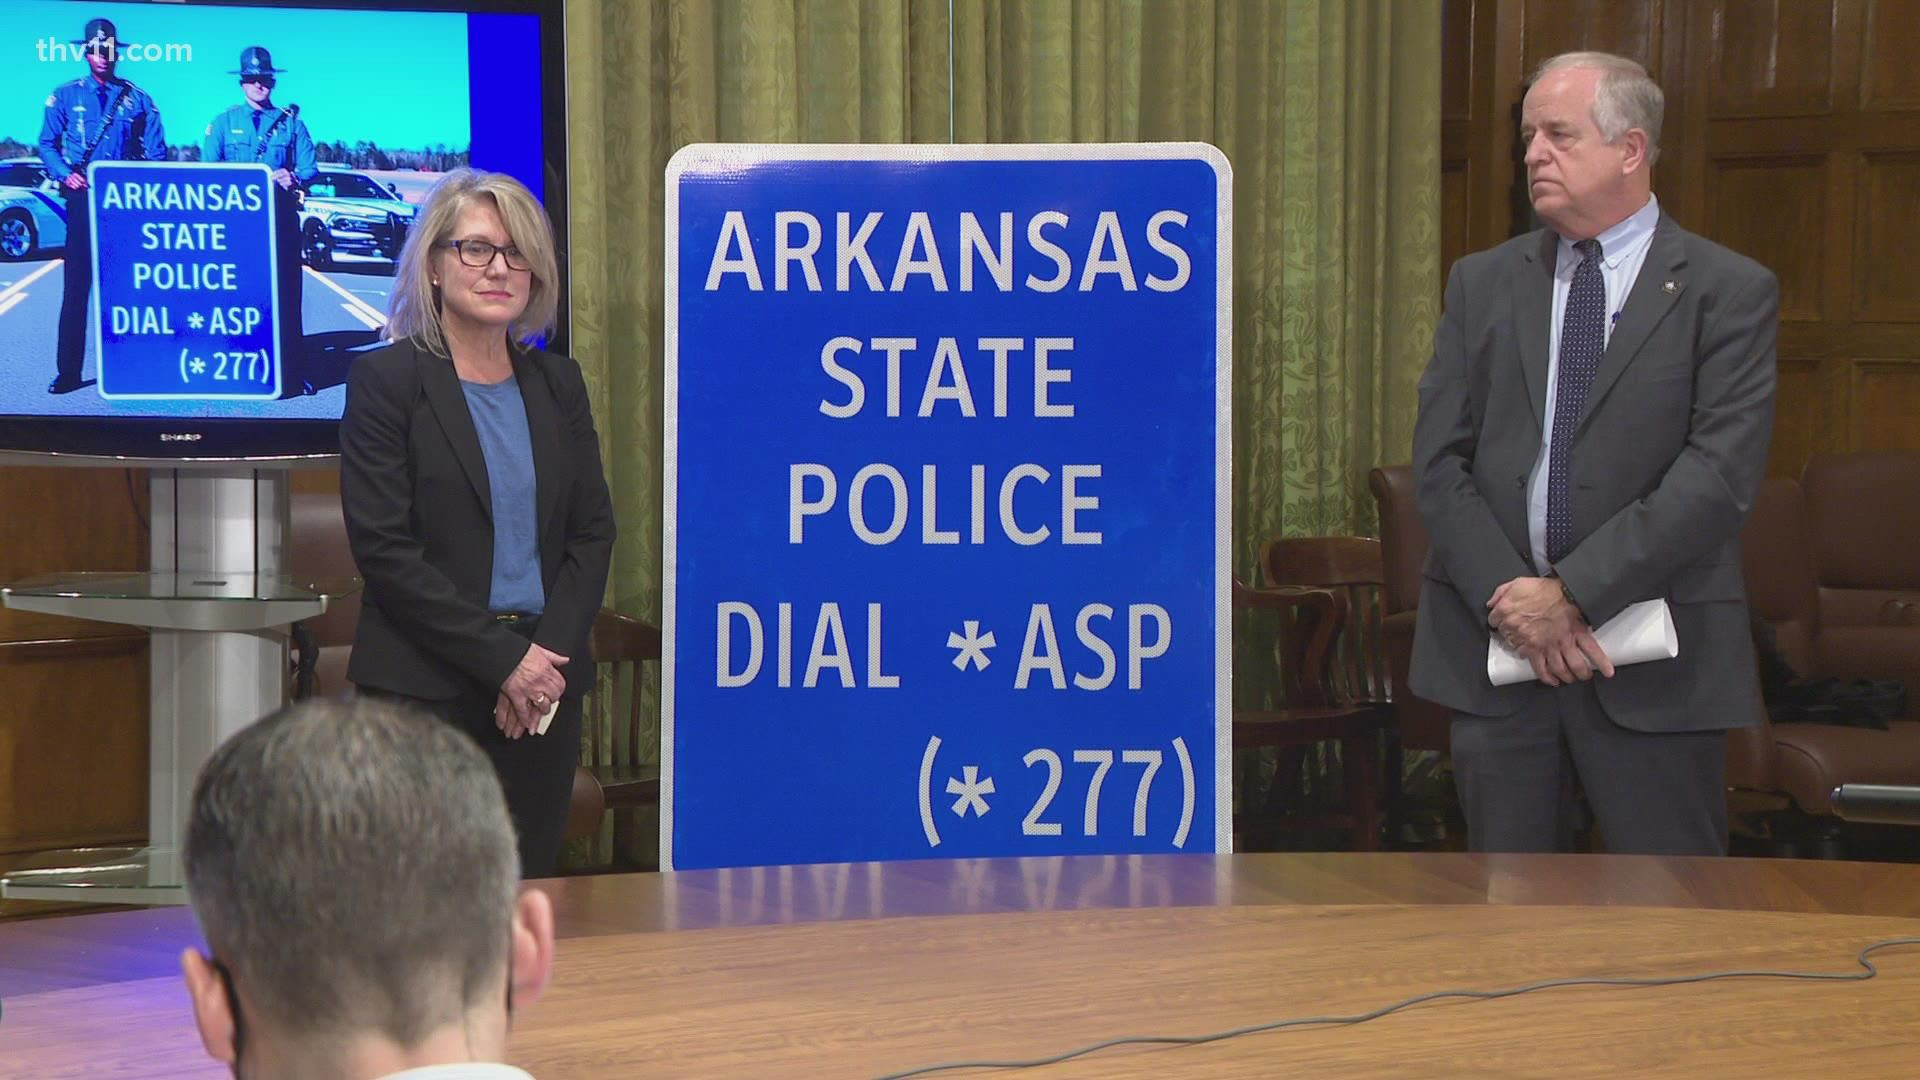 *277 is a non-emergency phone line that can be used by motorists across Arkansas who are stranded, lost or have safety concerns.